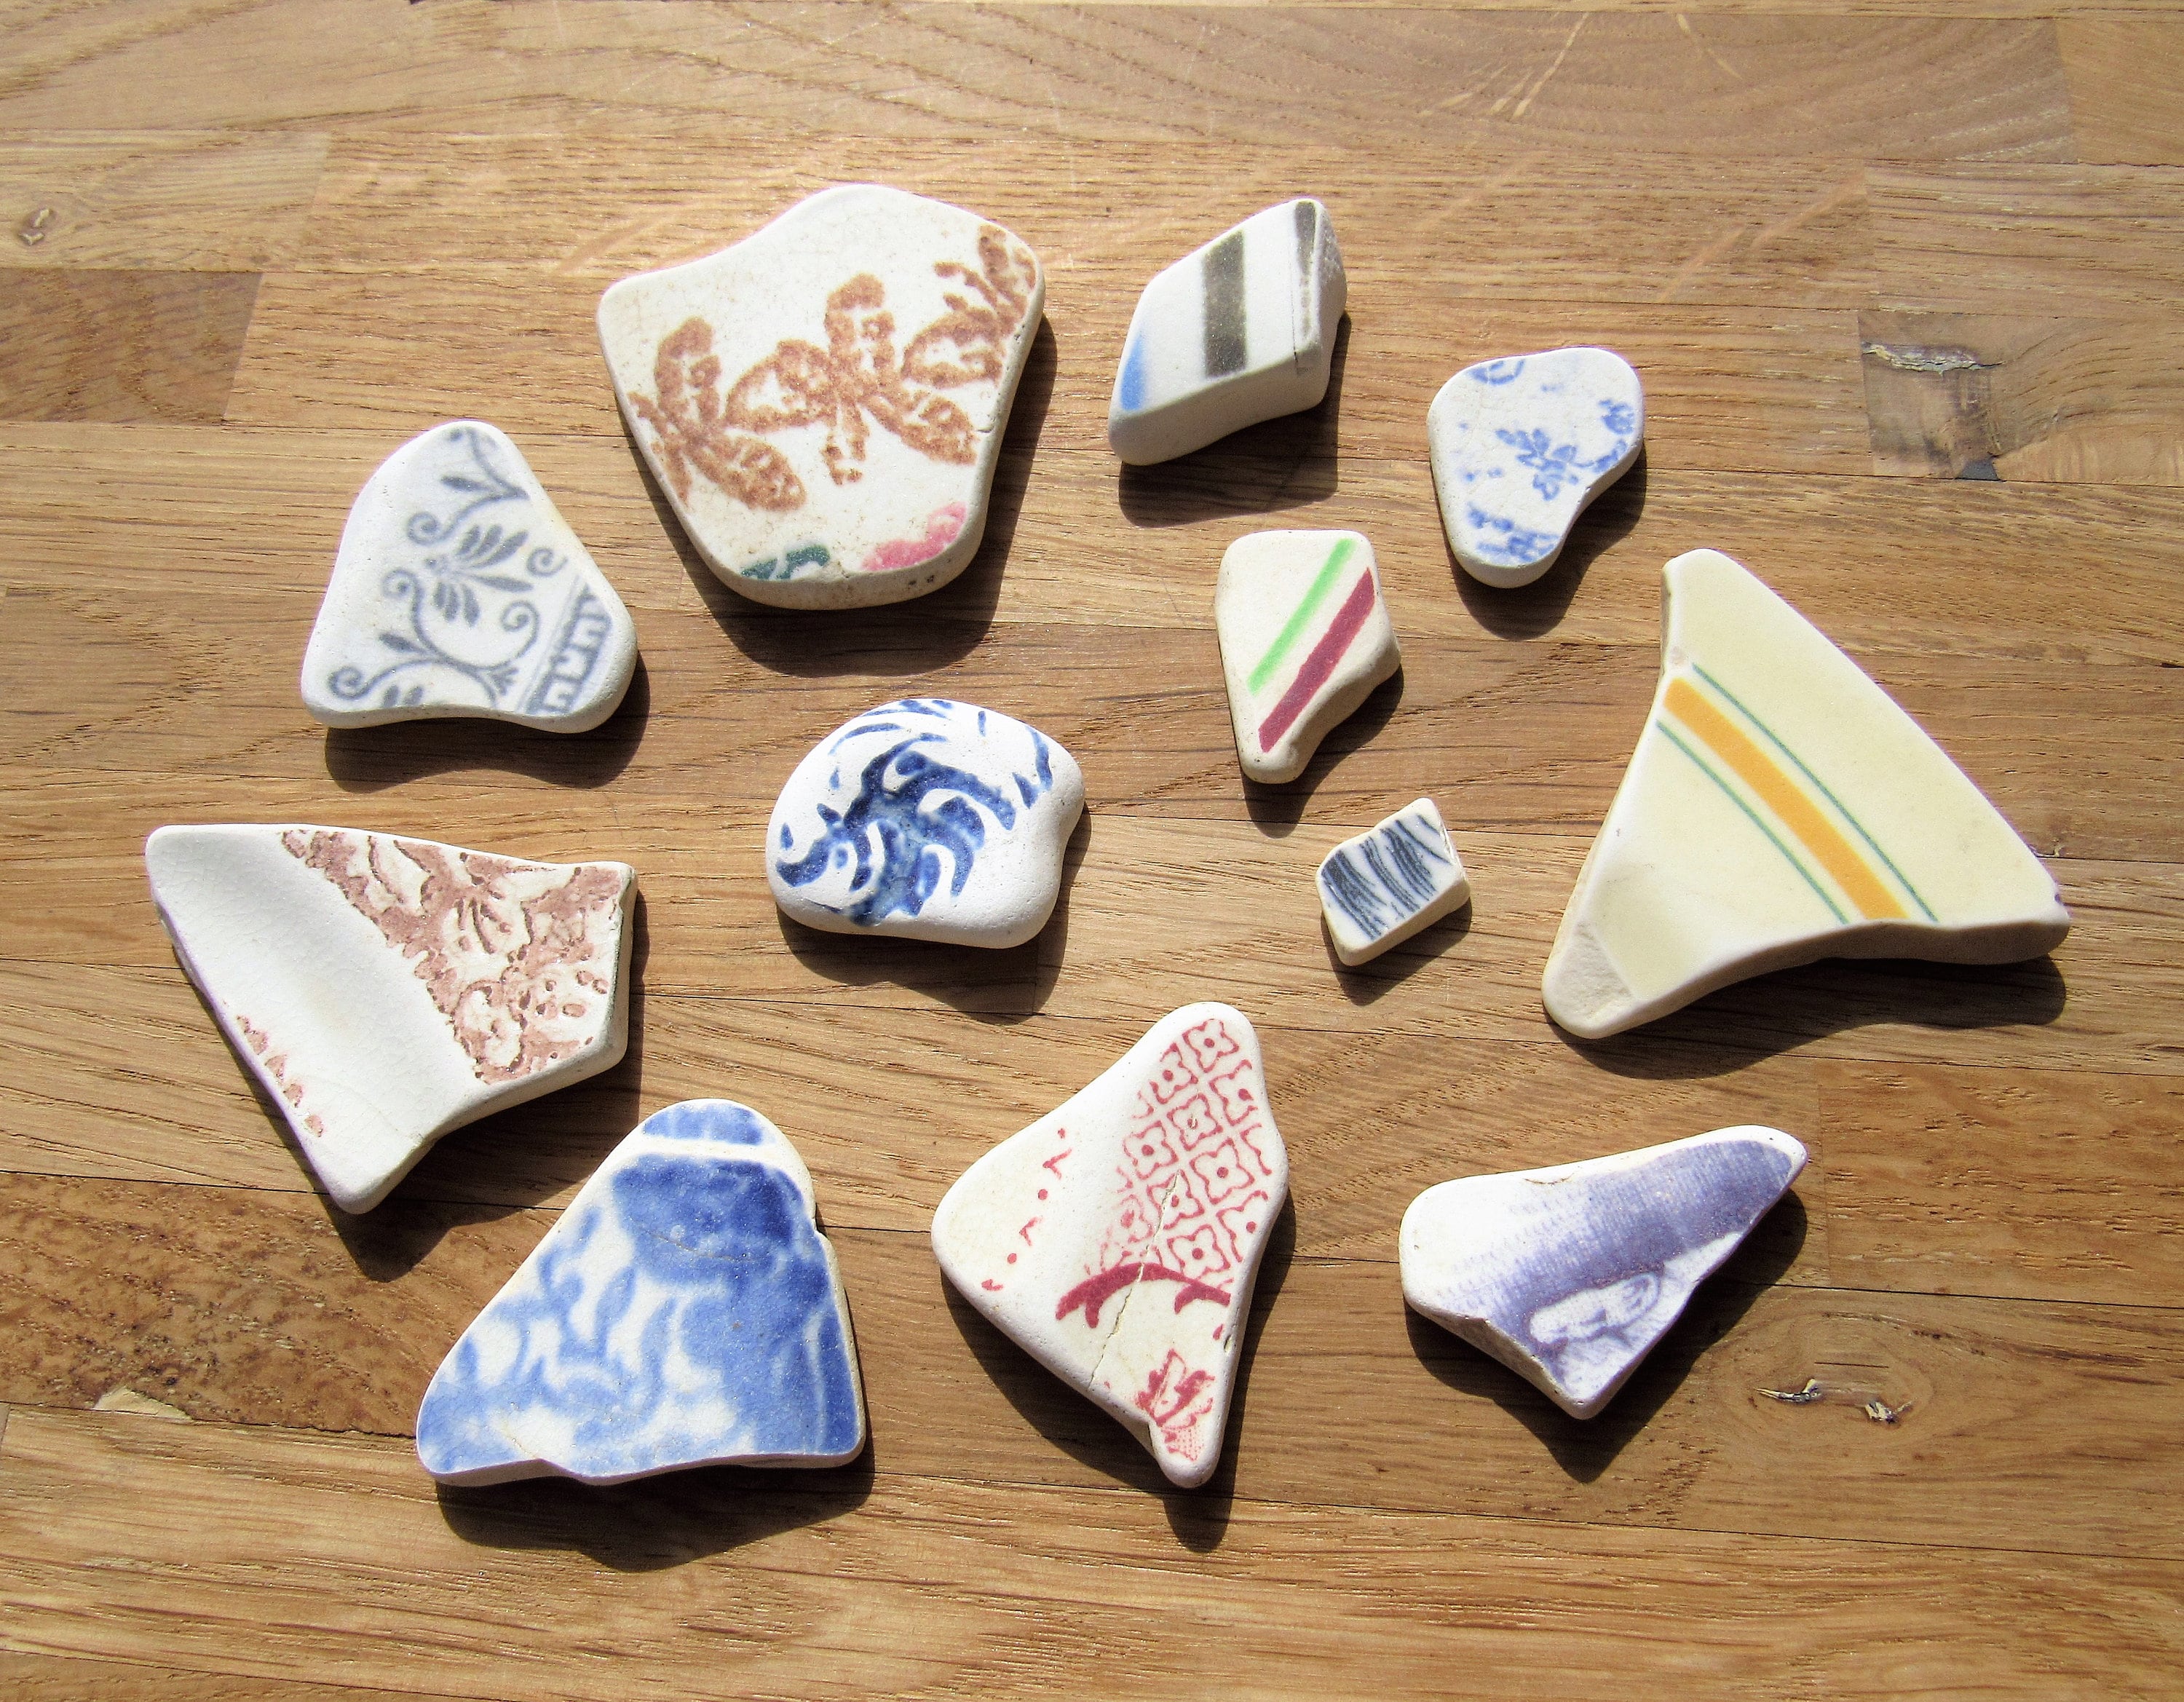 Earthsea Pottery - Peggy's wax resist with ocean colors